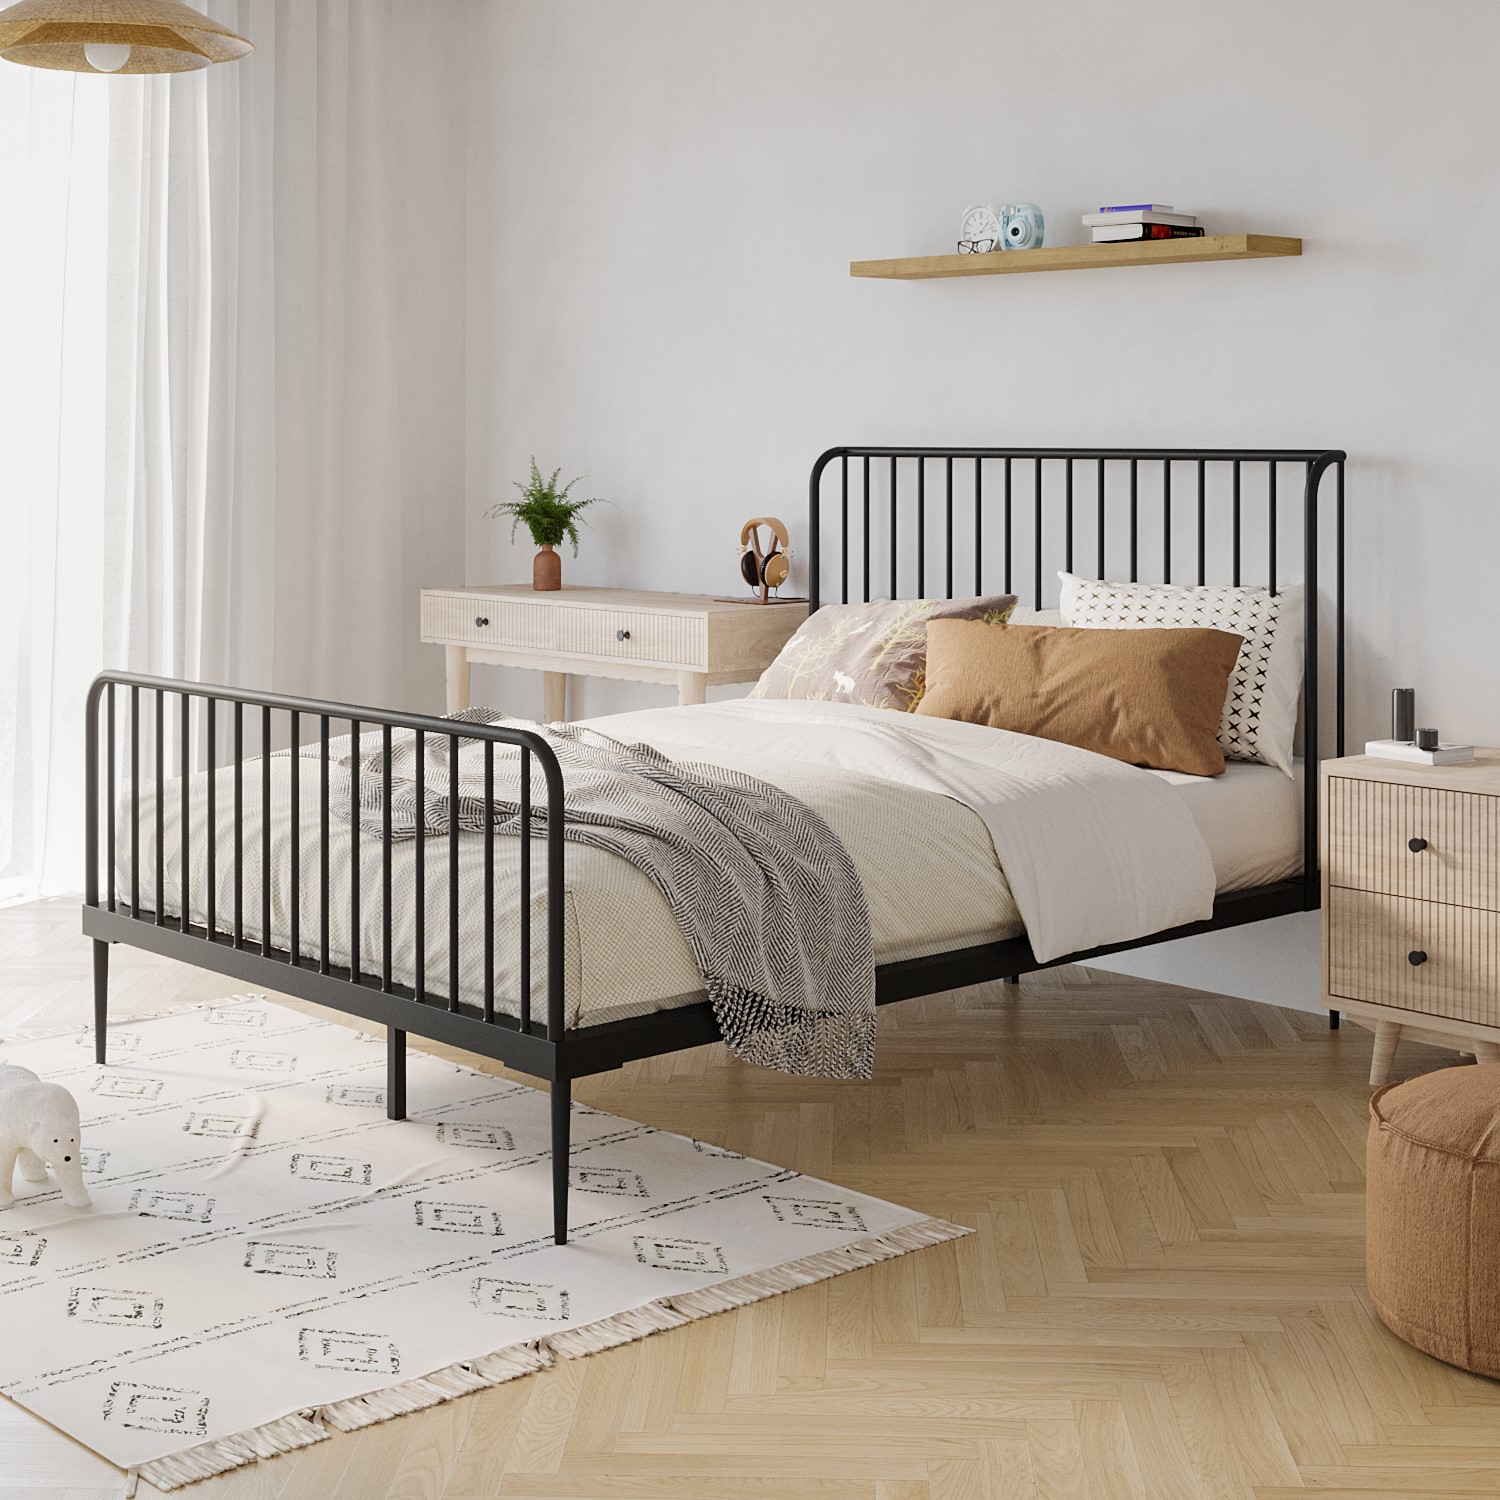 Photo of Black metal double bed frame - jackson